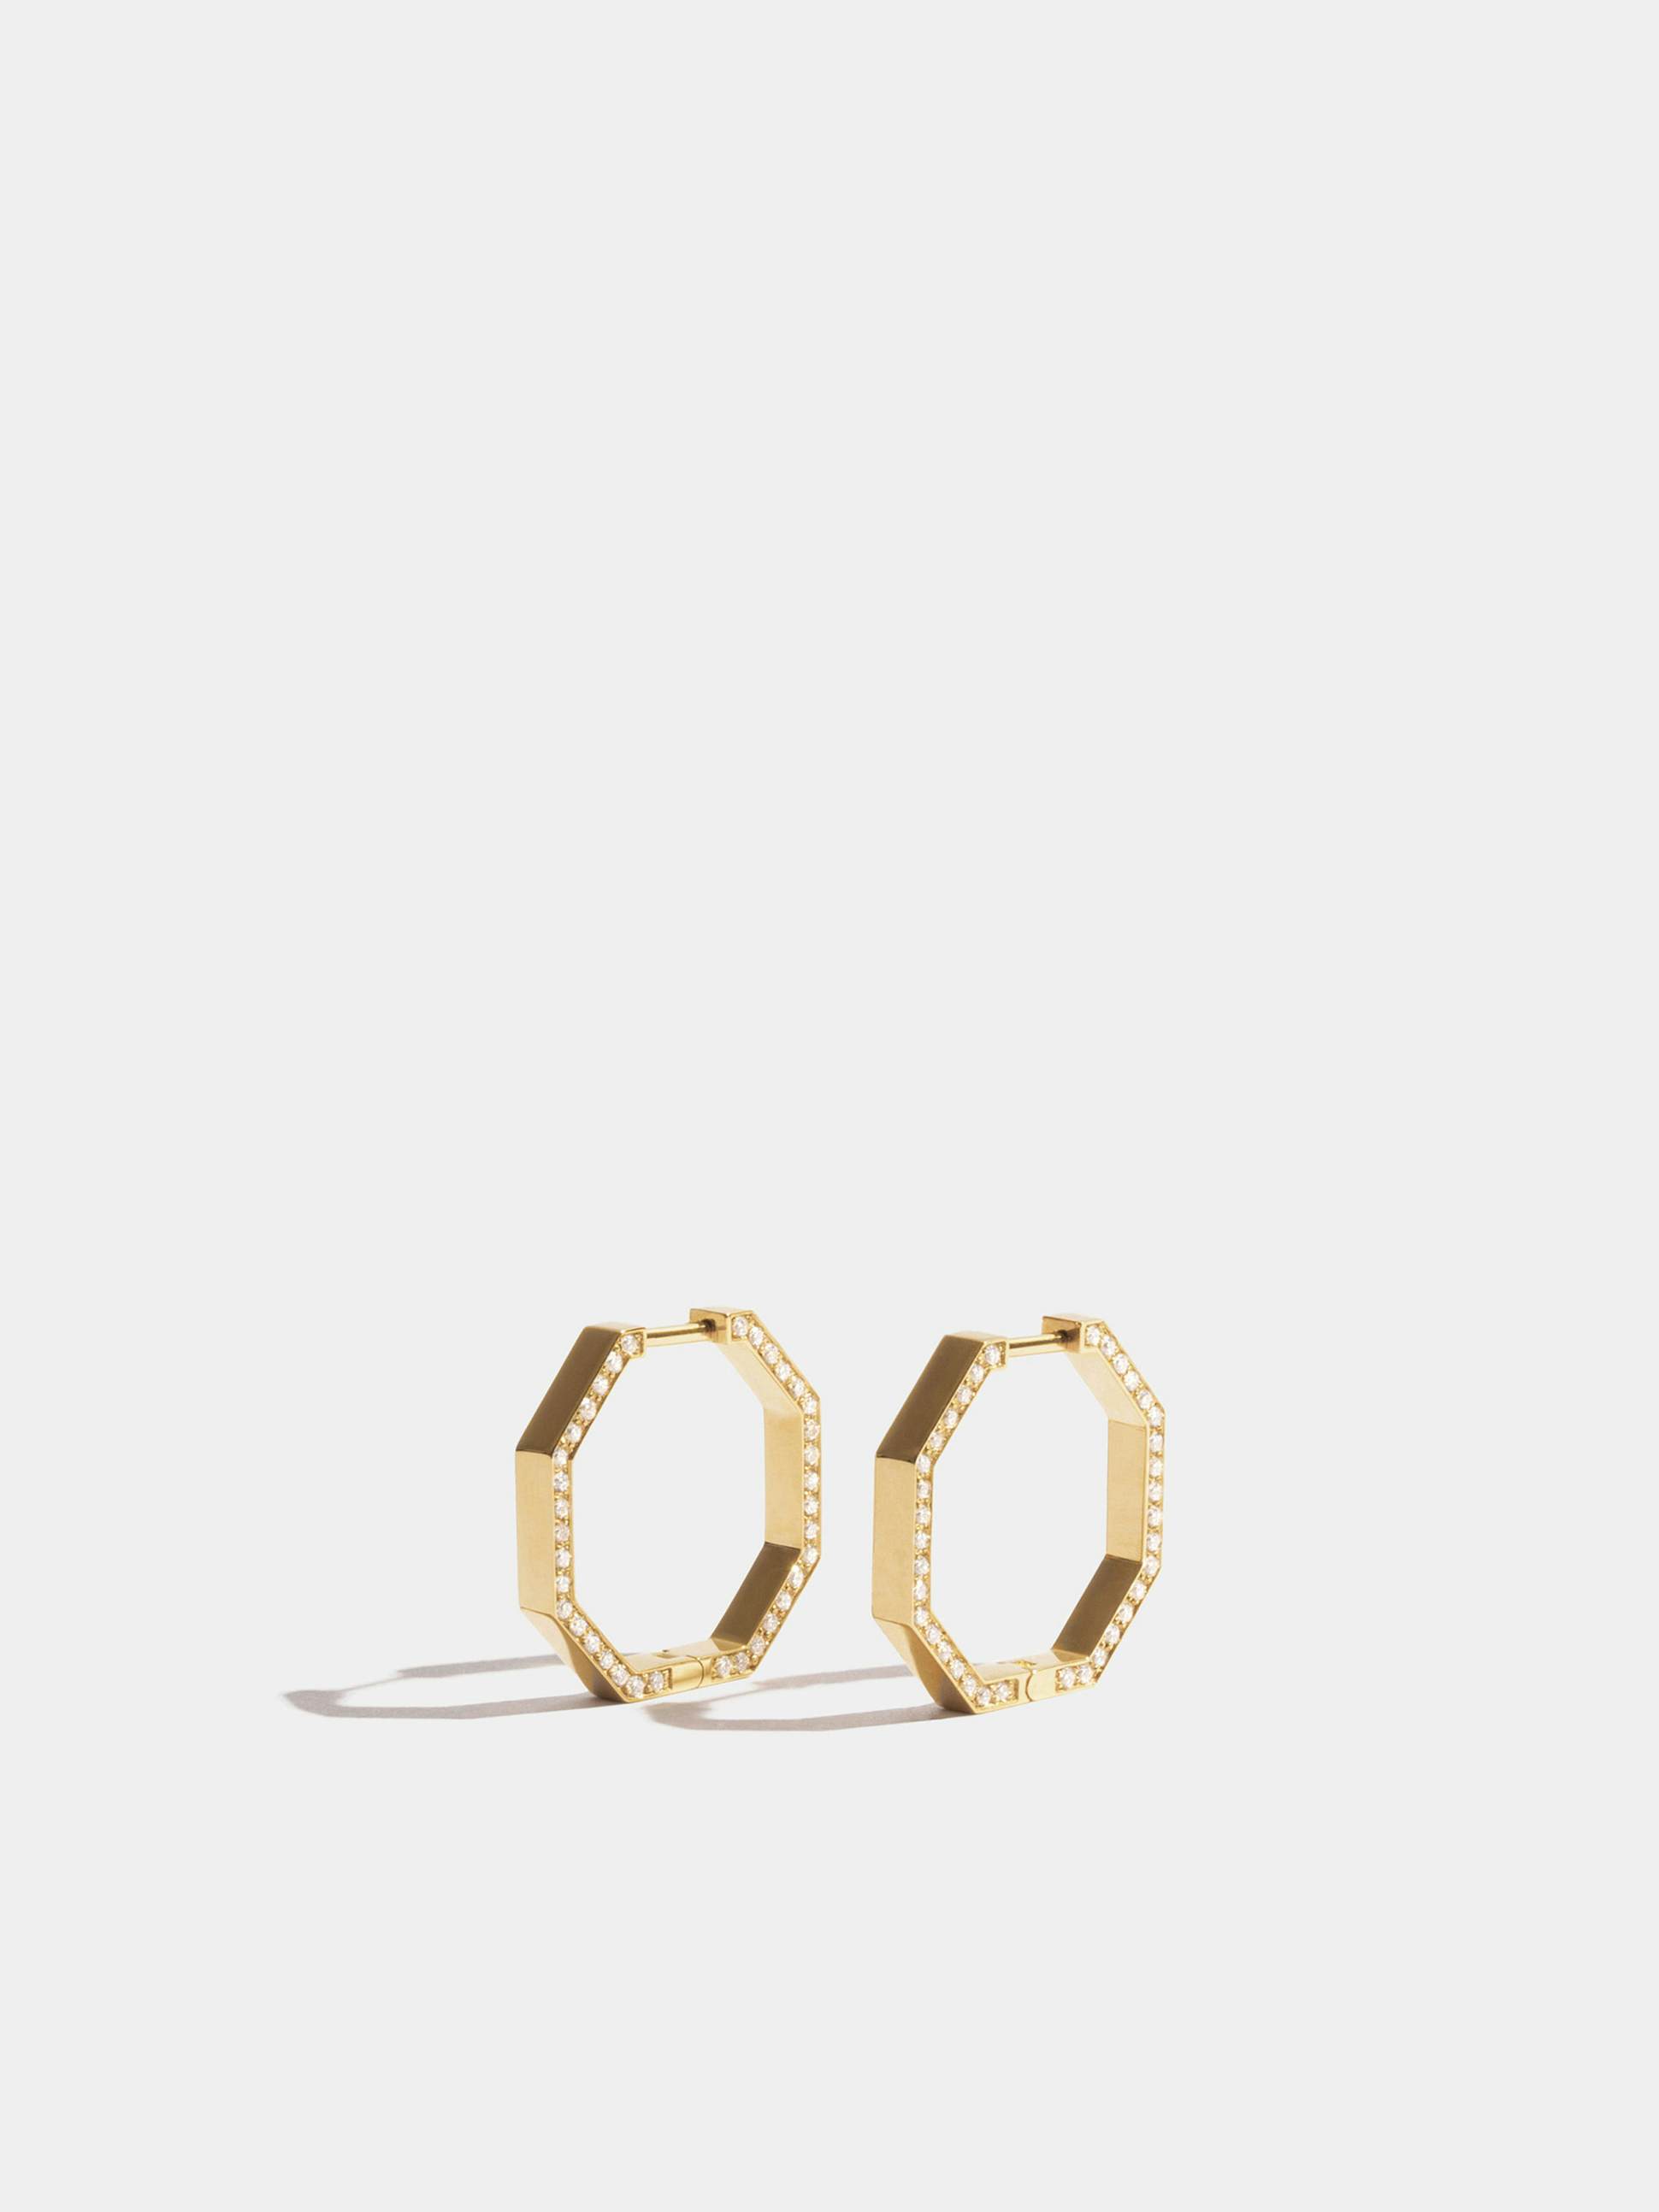 Octogone 18mm earrings in 18k Fairmined ethical yellow gold, paved with lab-grown diamonds on the edge, the pair.